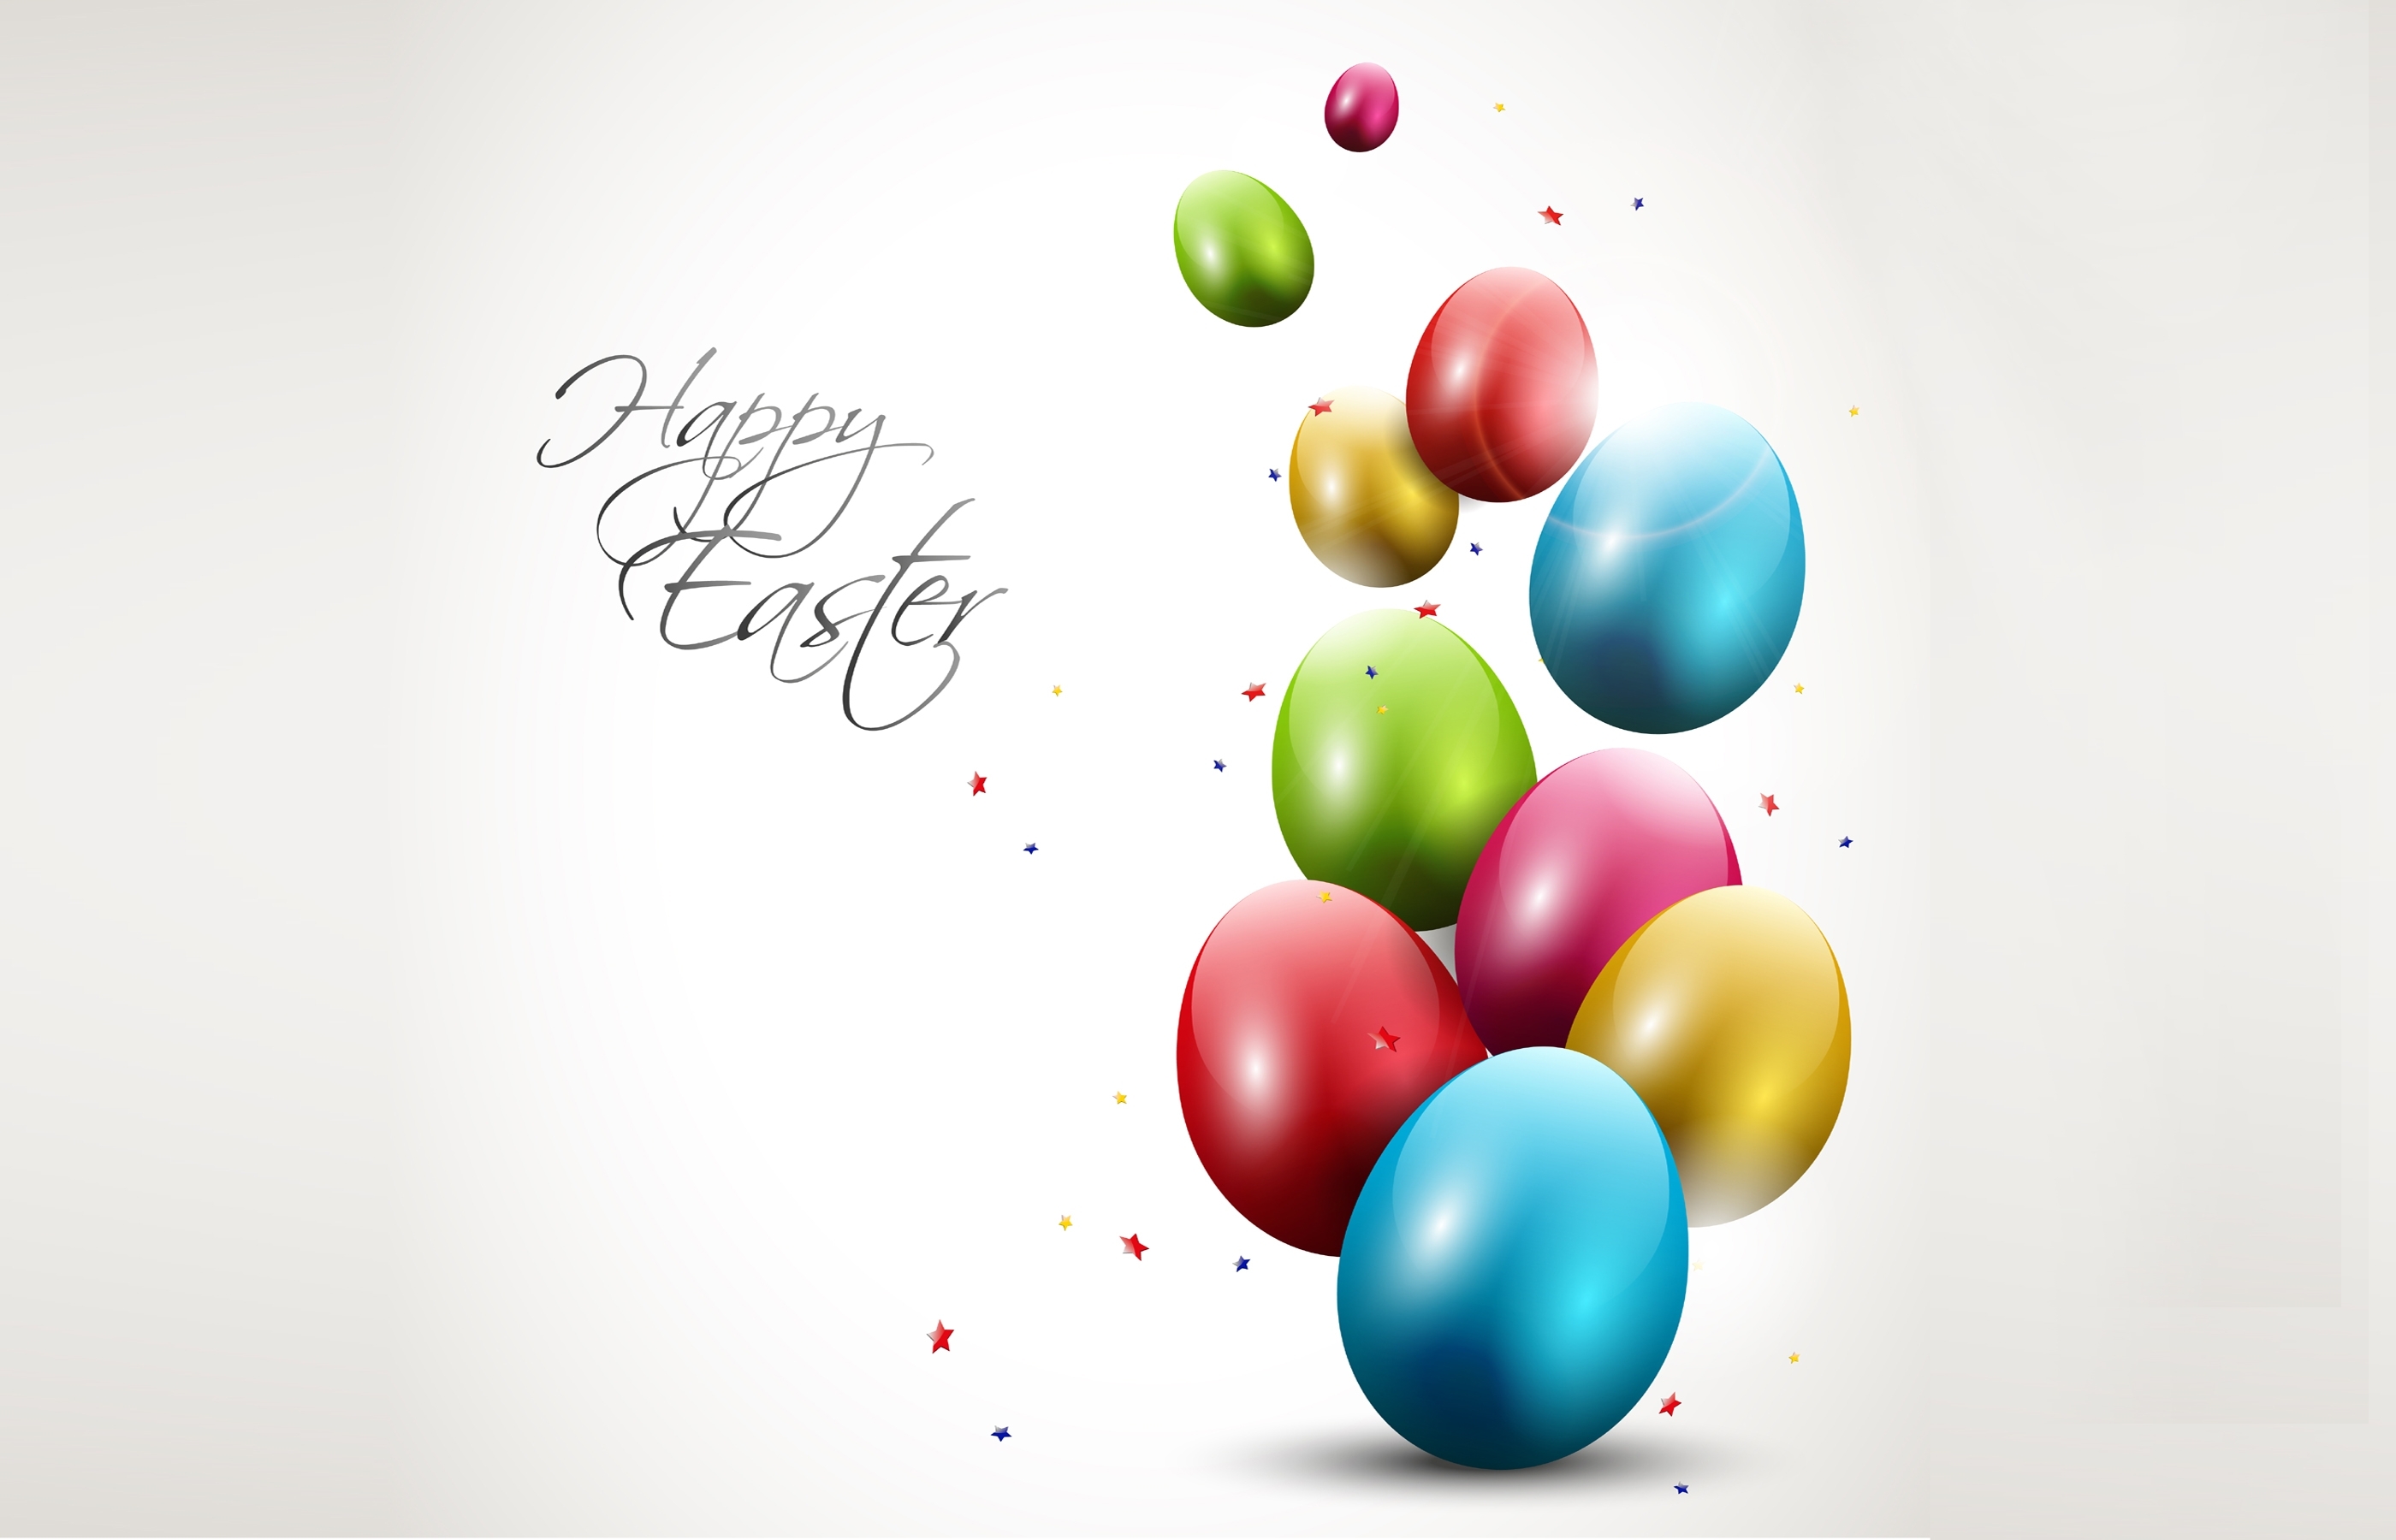 10 Top Happy Easter Images Hd FULL HD 1080p For PC Background